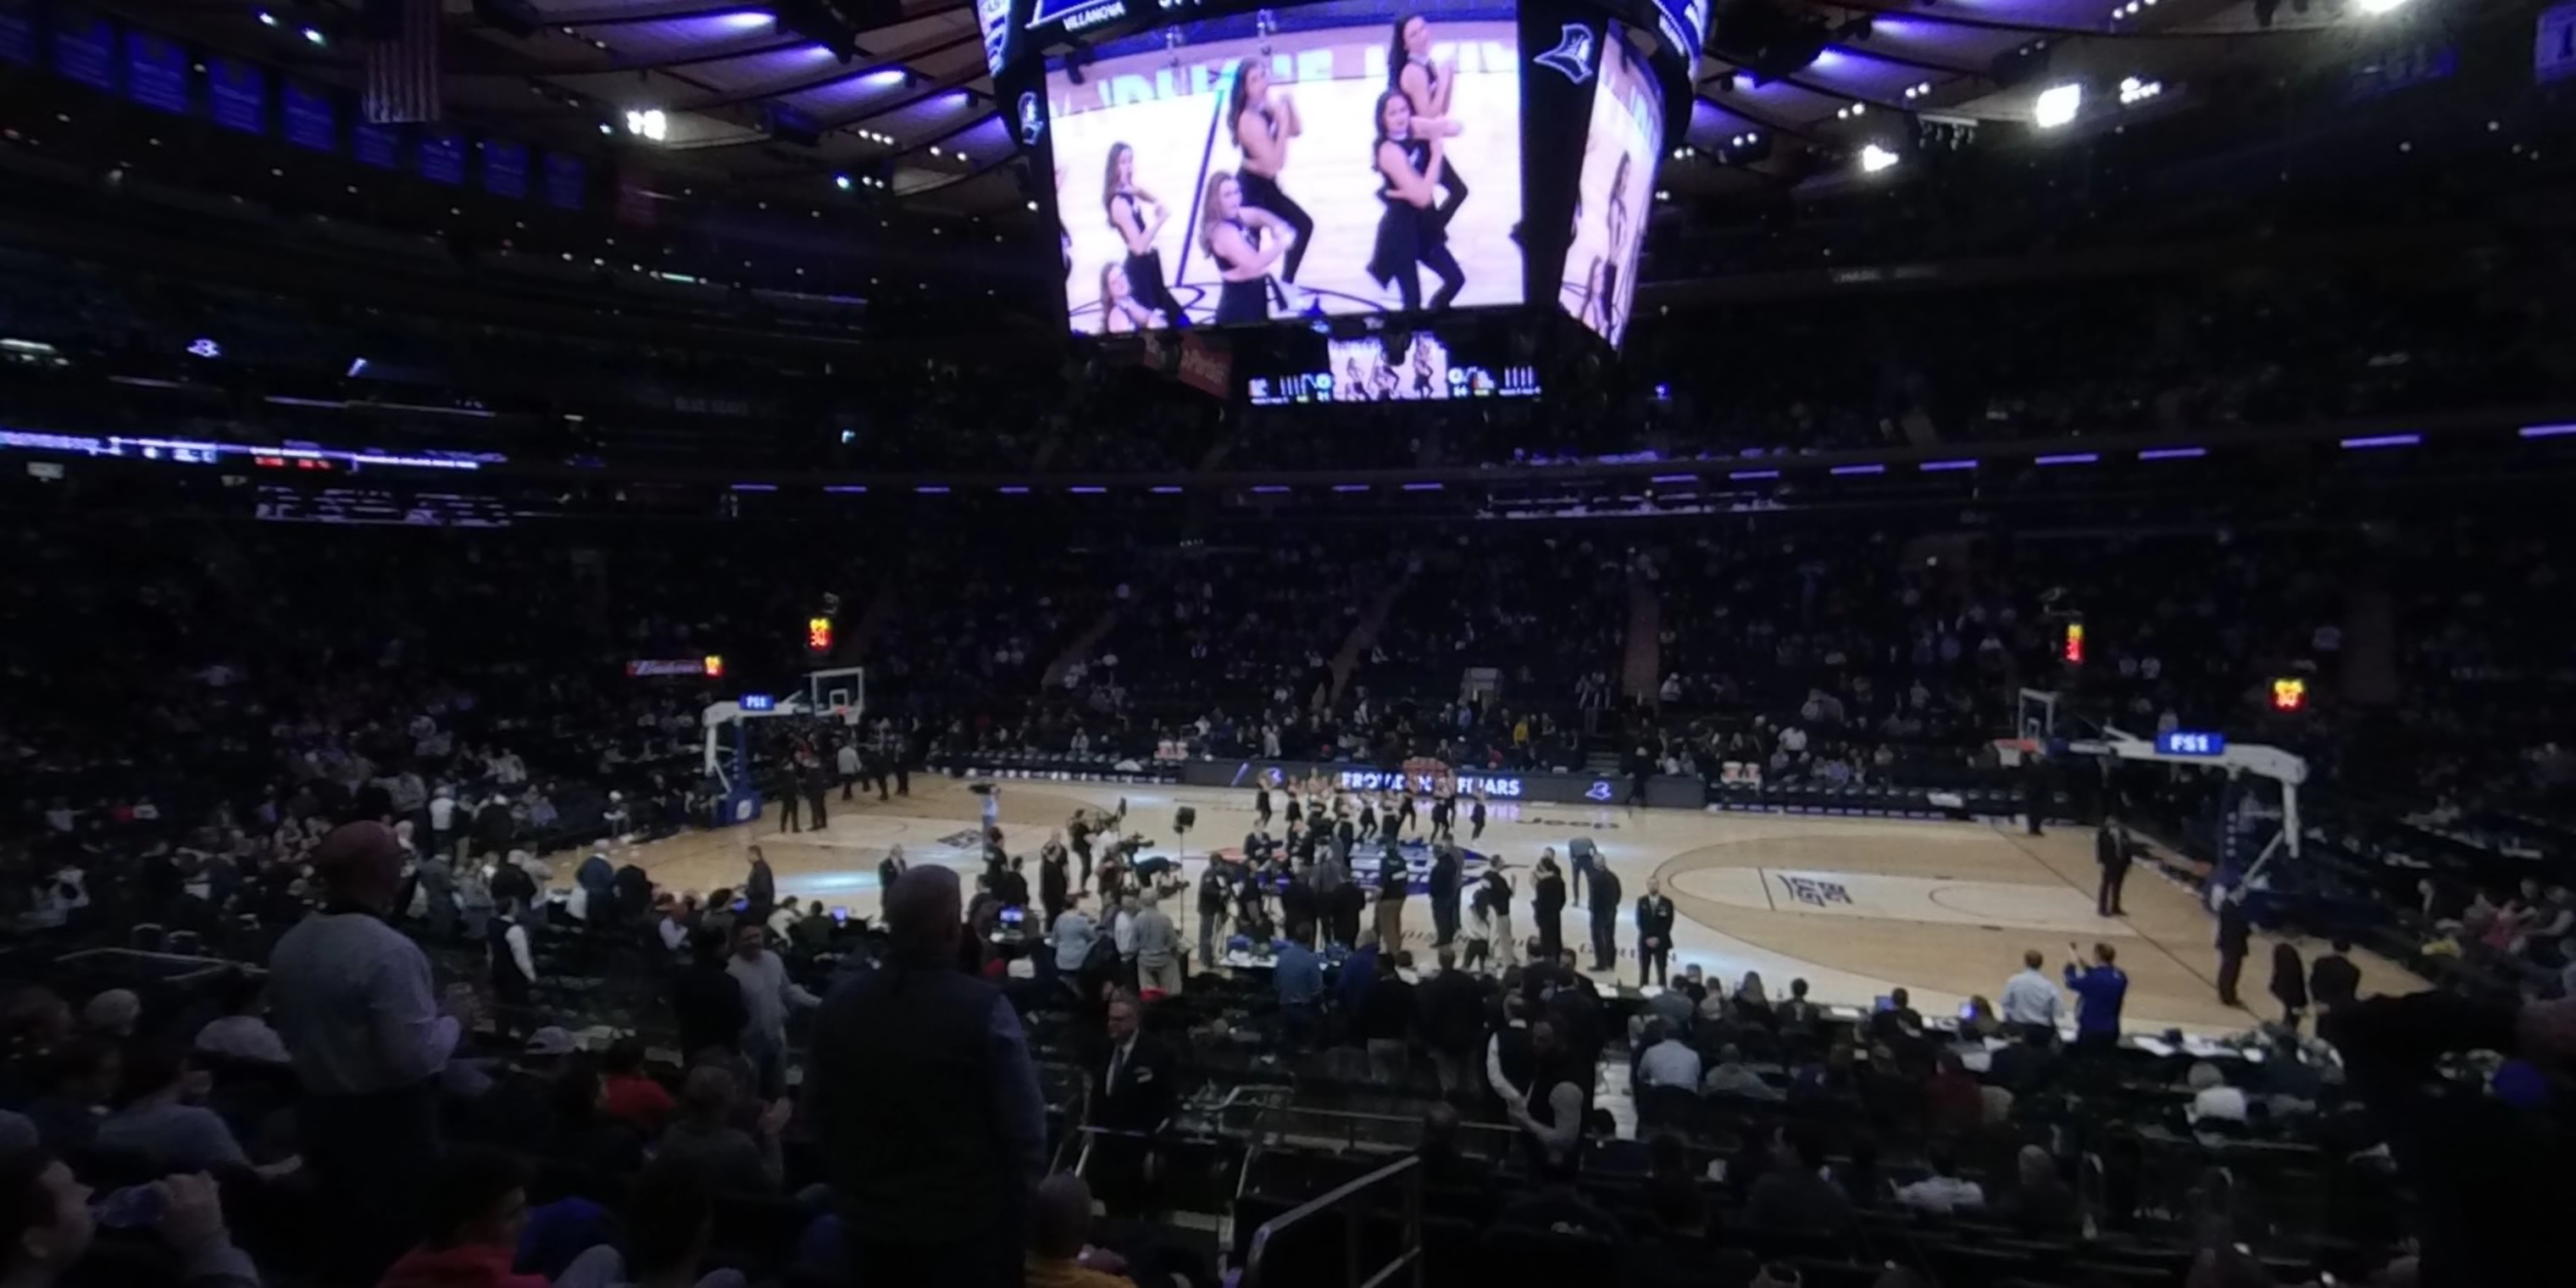 section 117 panoramic seat view  for basketball - madison square garden